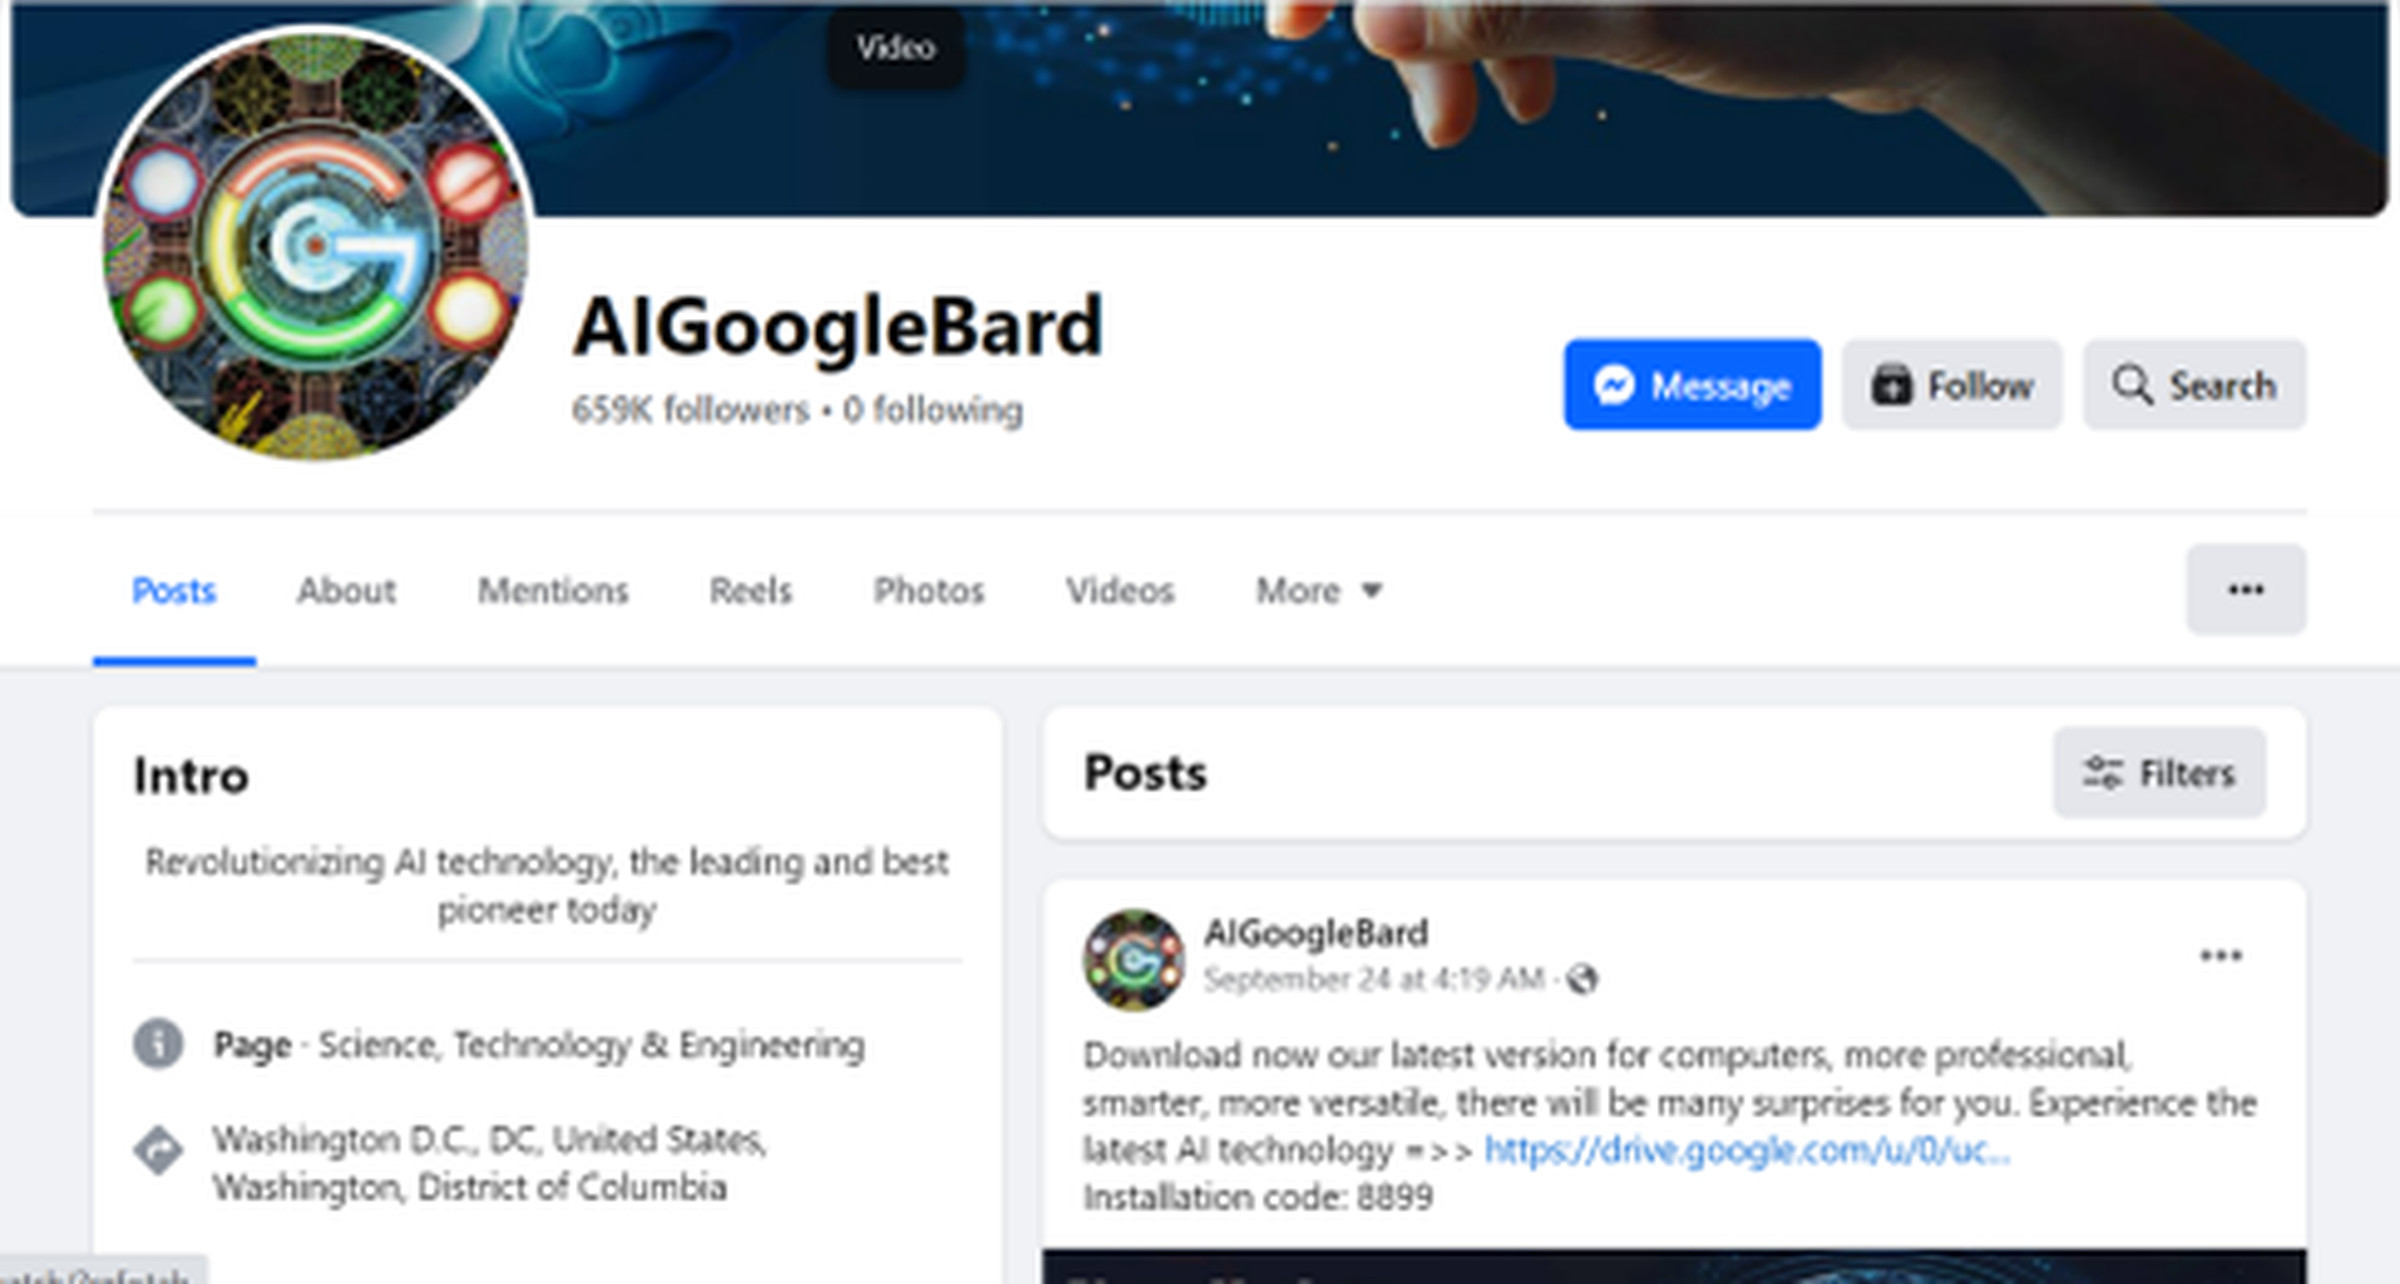 Facebook screenshot of AIGoogleBard page with a link to “download” Bard.